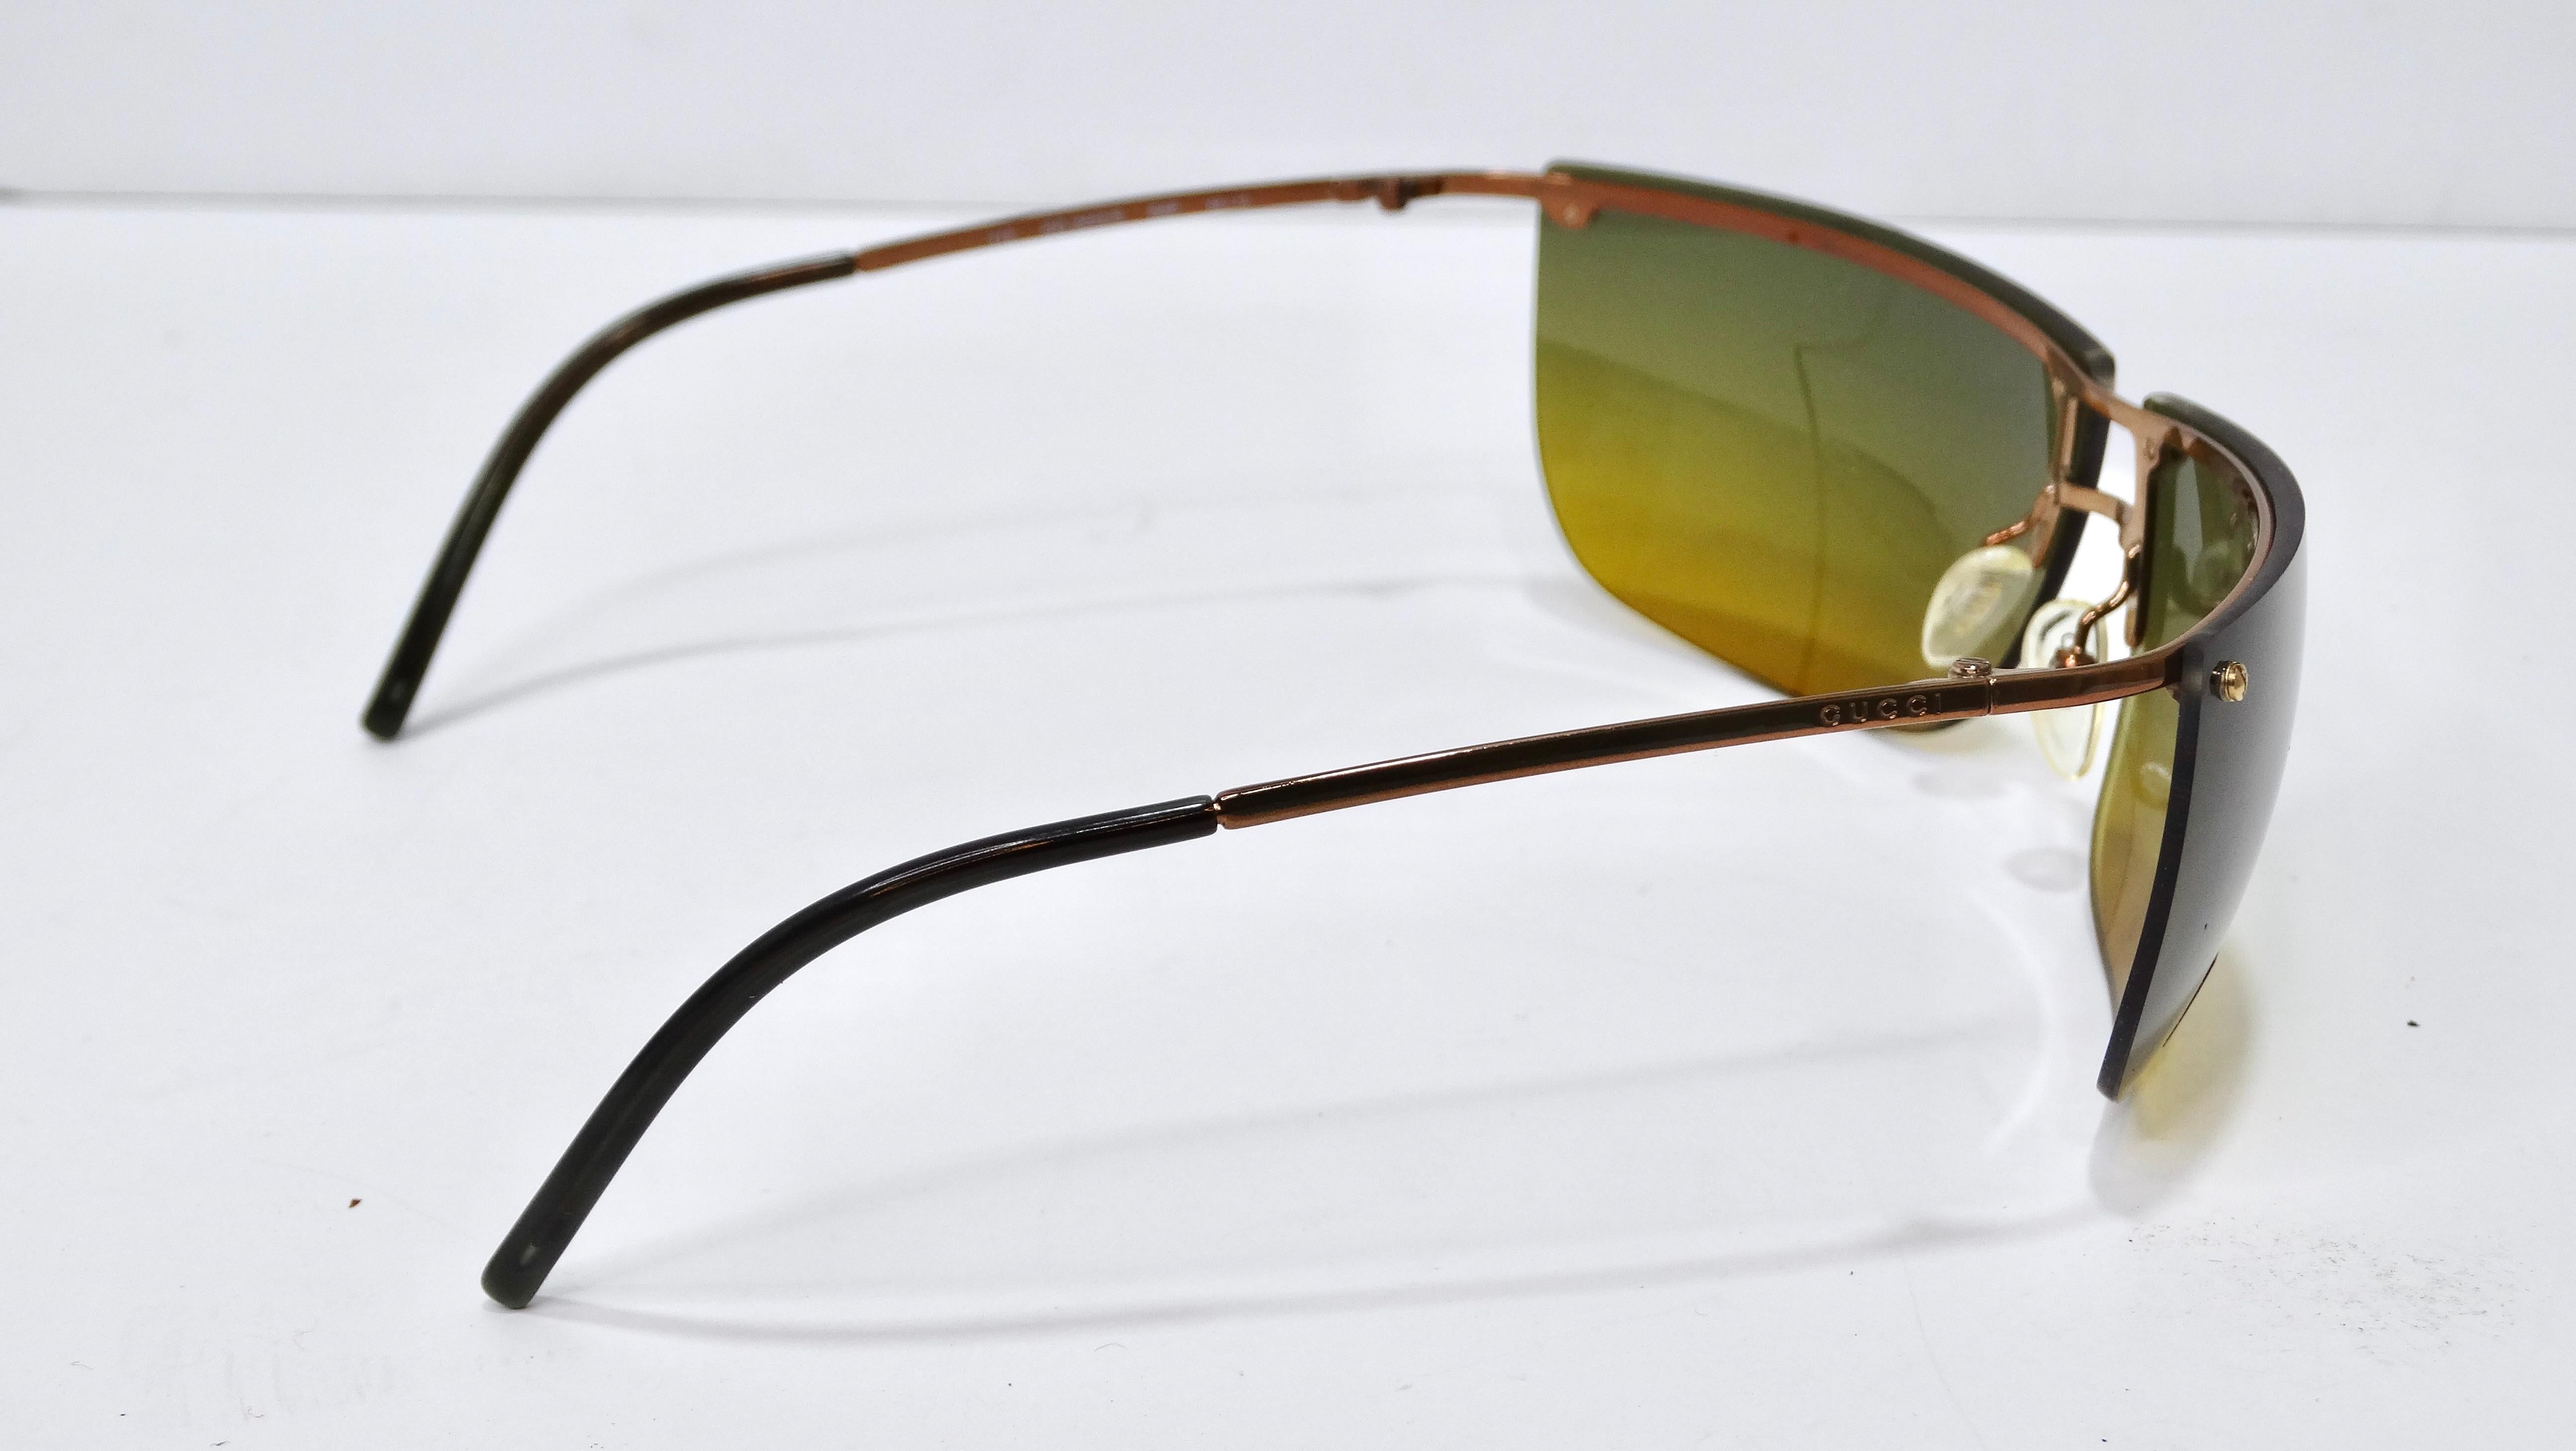 Gucci Vintage 1990's Semi-Rimless Rectangle Sunglasses In Excellent Condition For Sale In Scottsdale, AZ